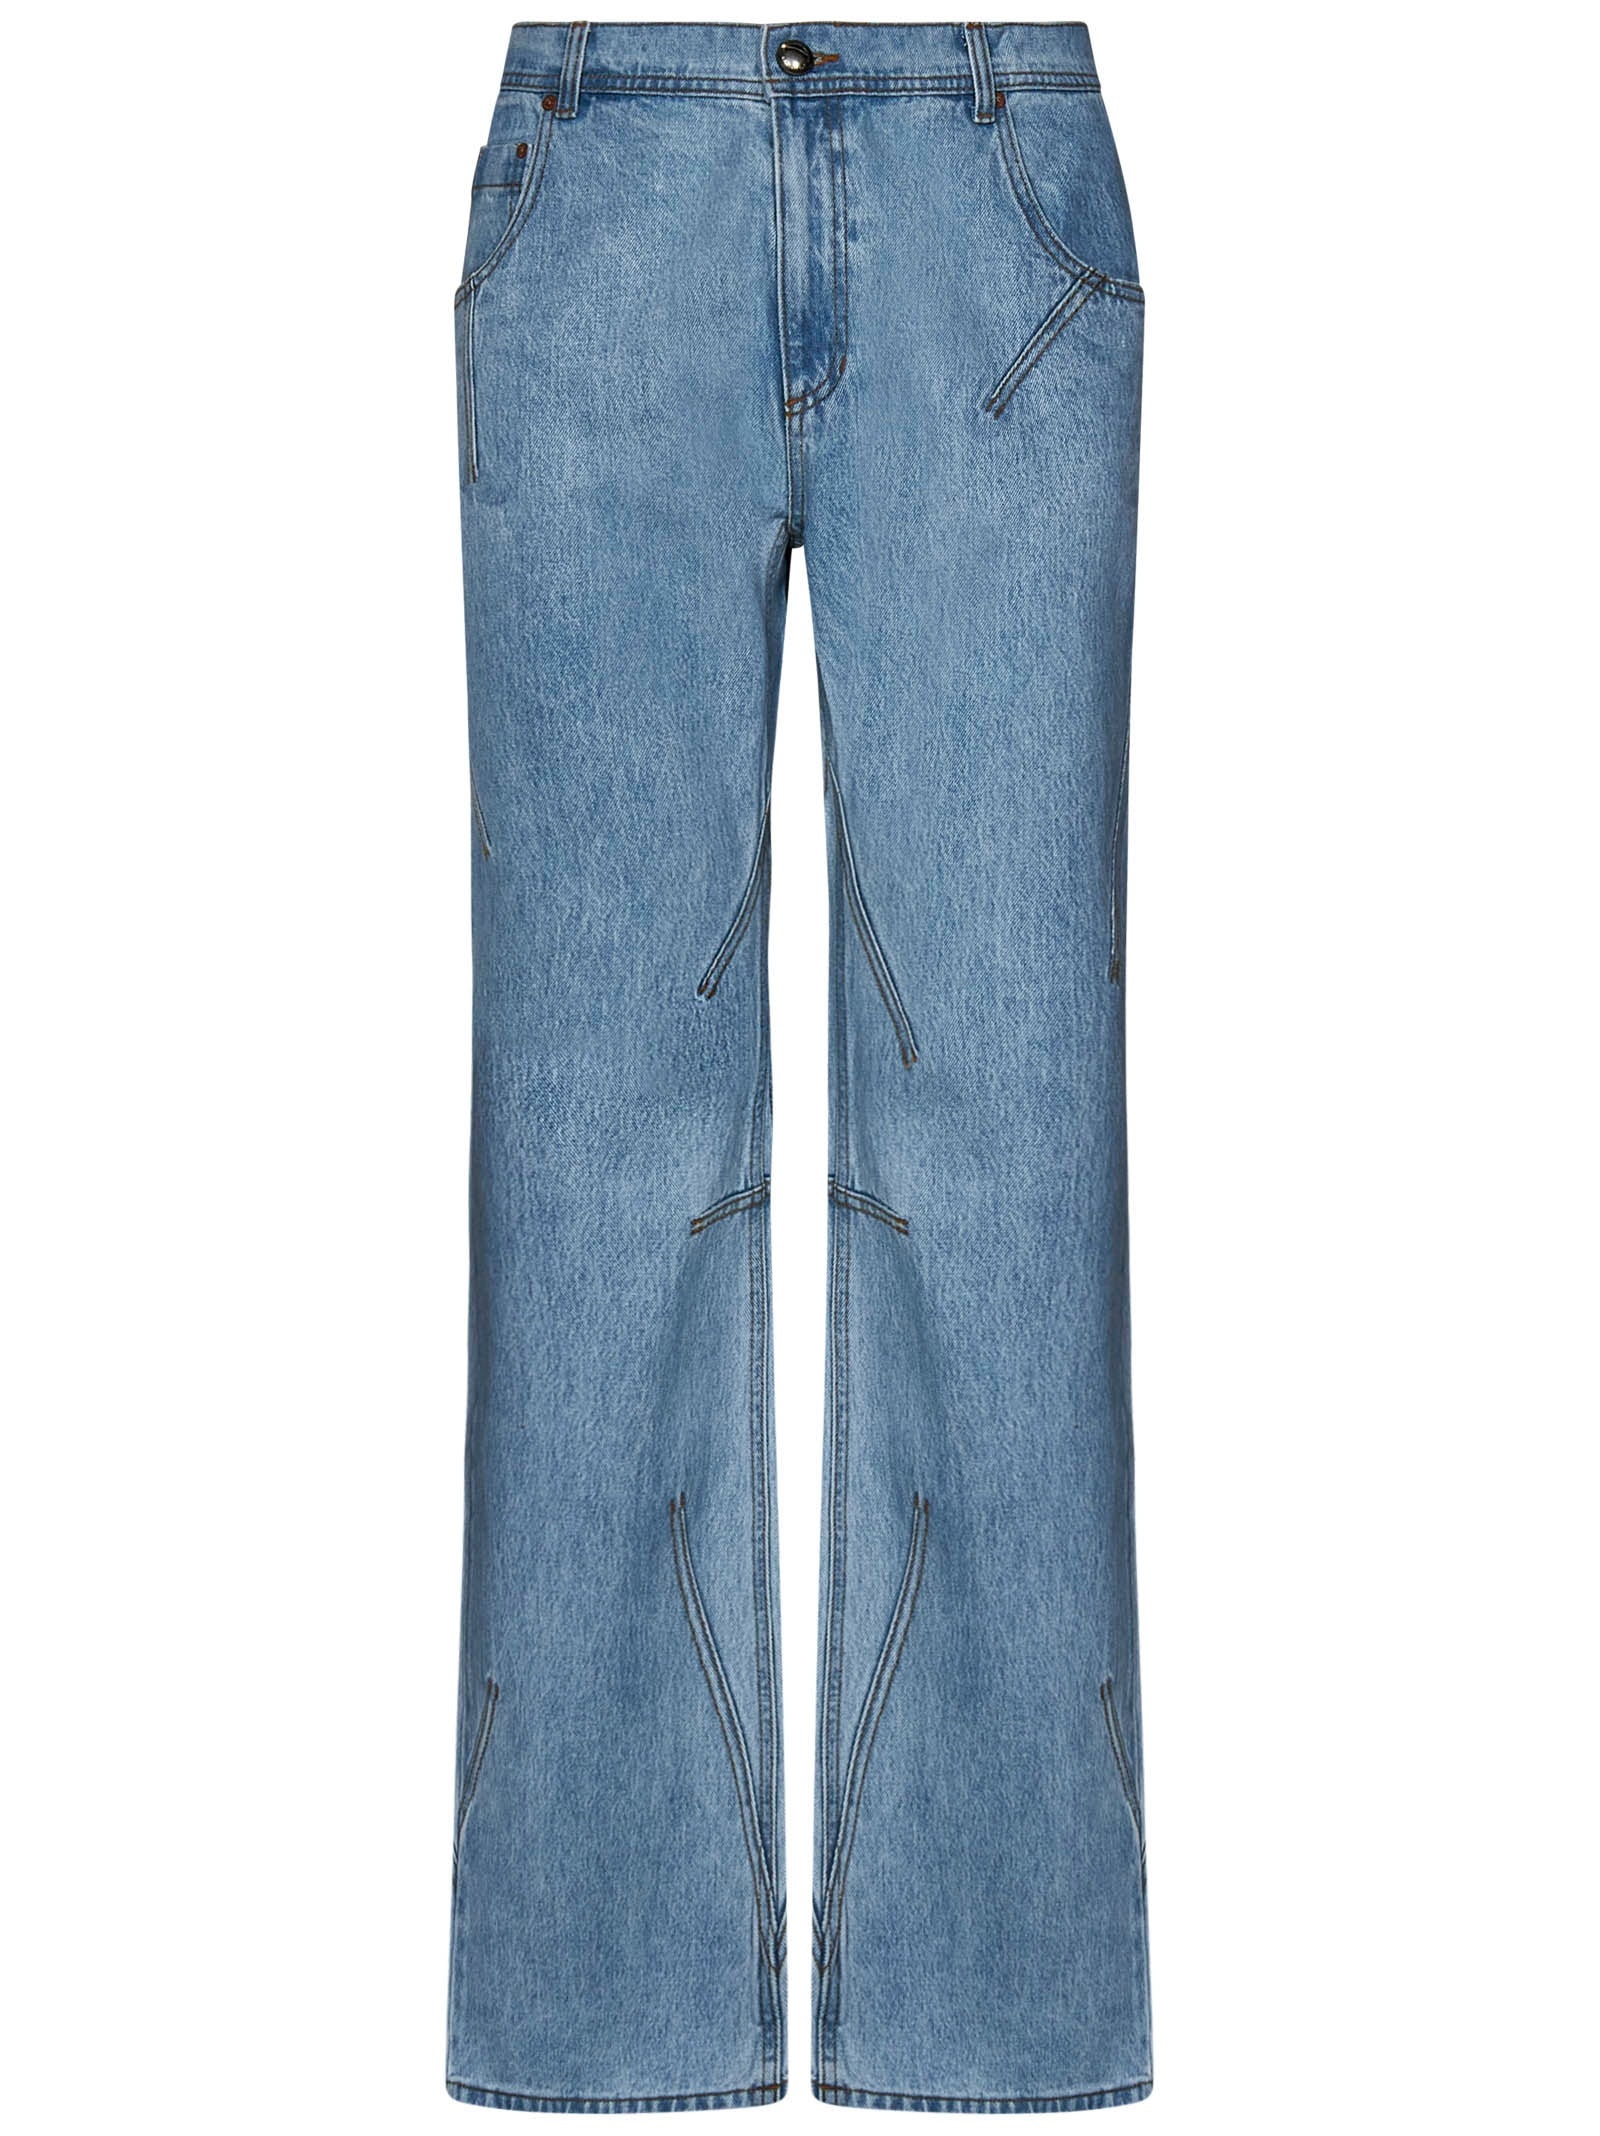 ANDERSSON BELL JEANS - 1